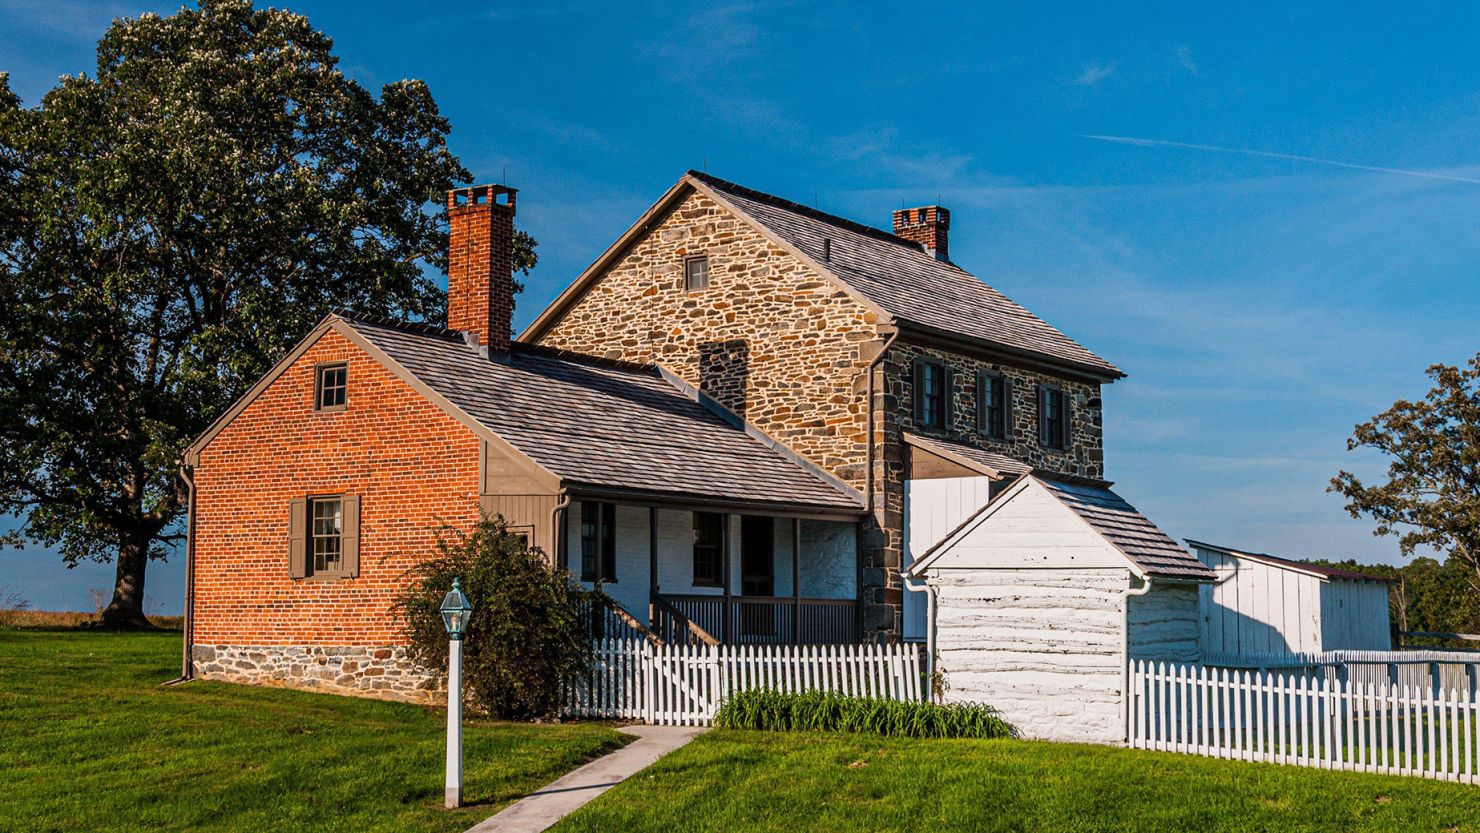 The historic Michael Bushman home on Gettysburg battlefield will soon be welcoming overnight guests.